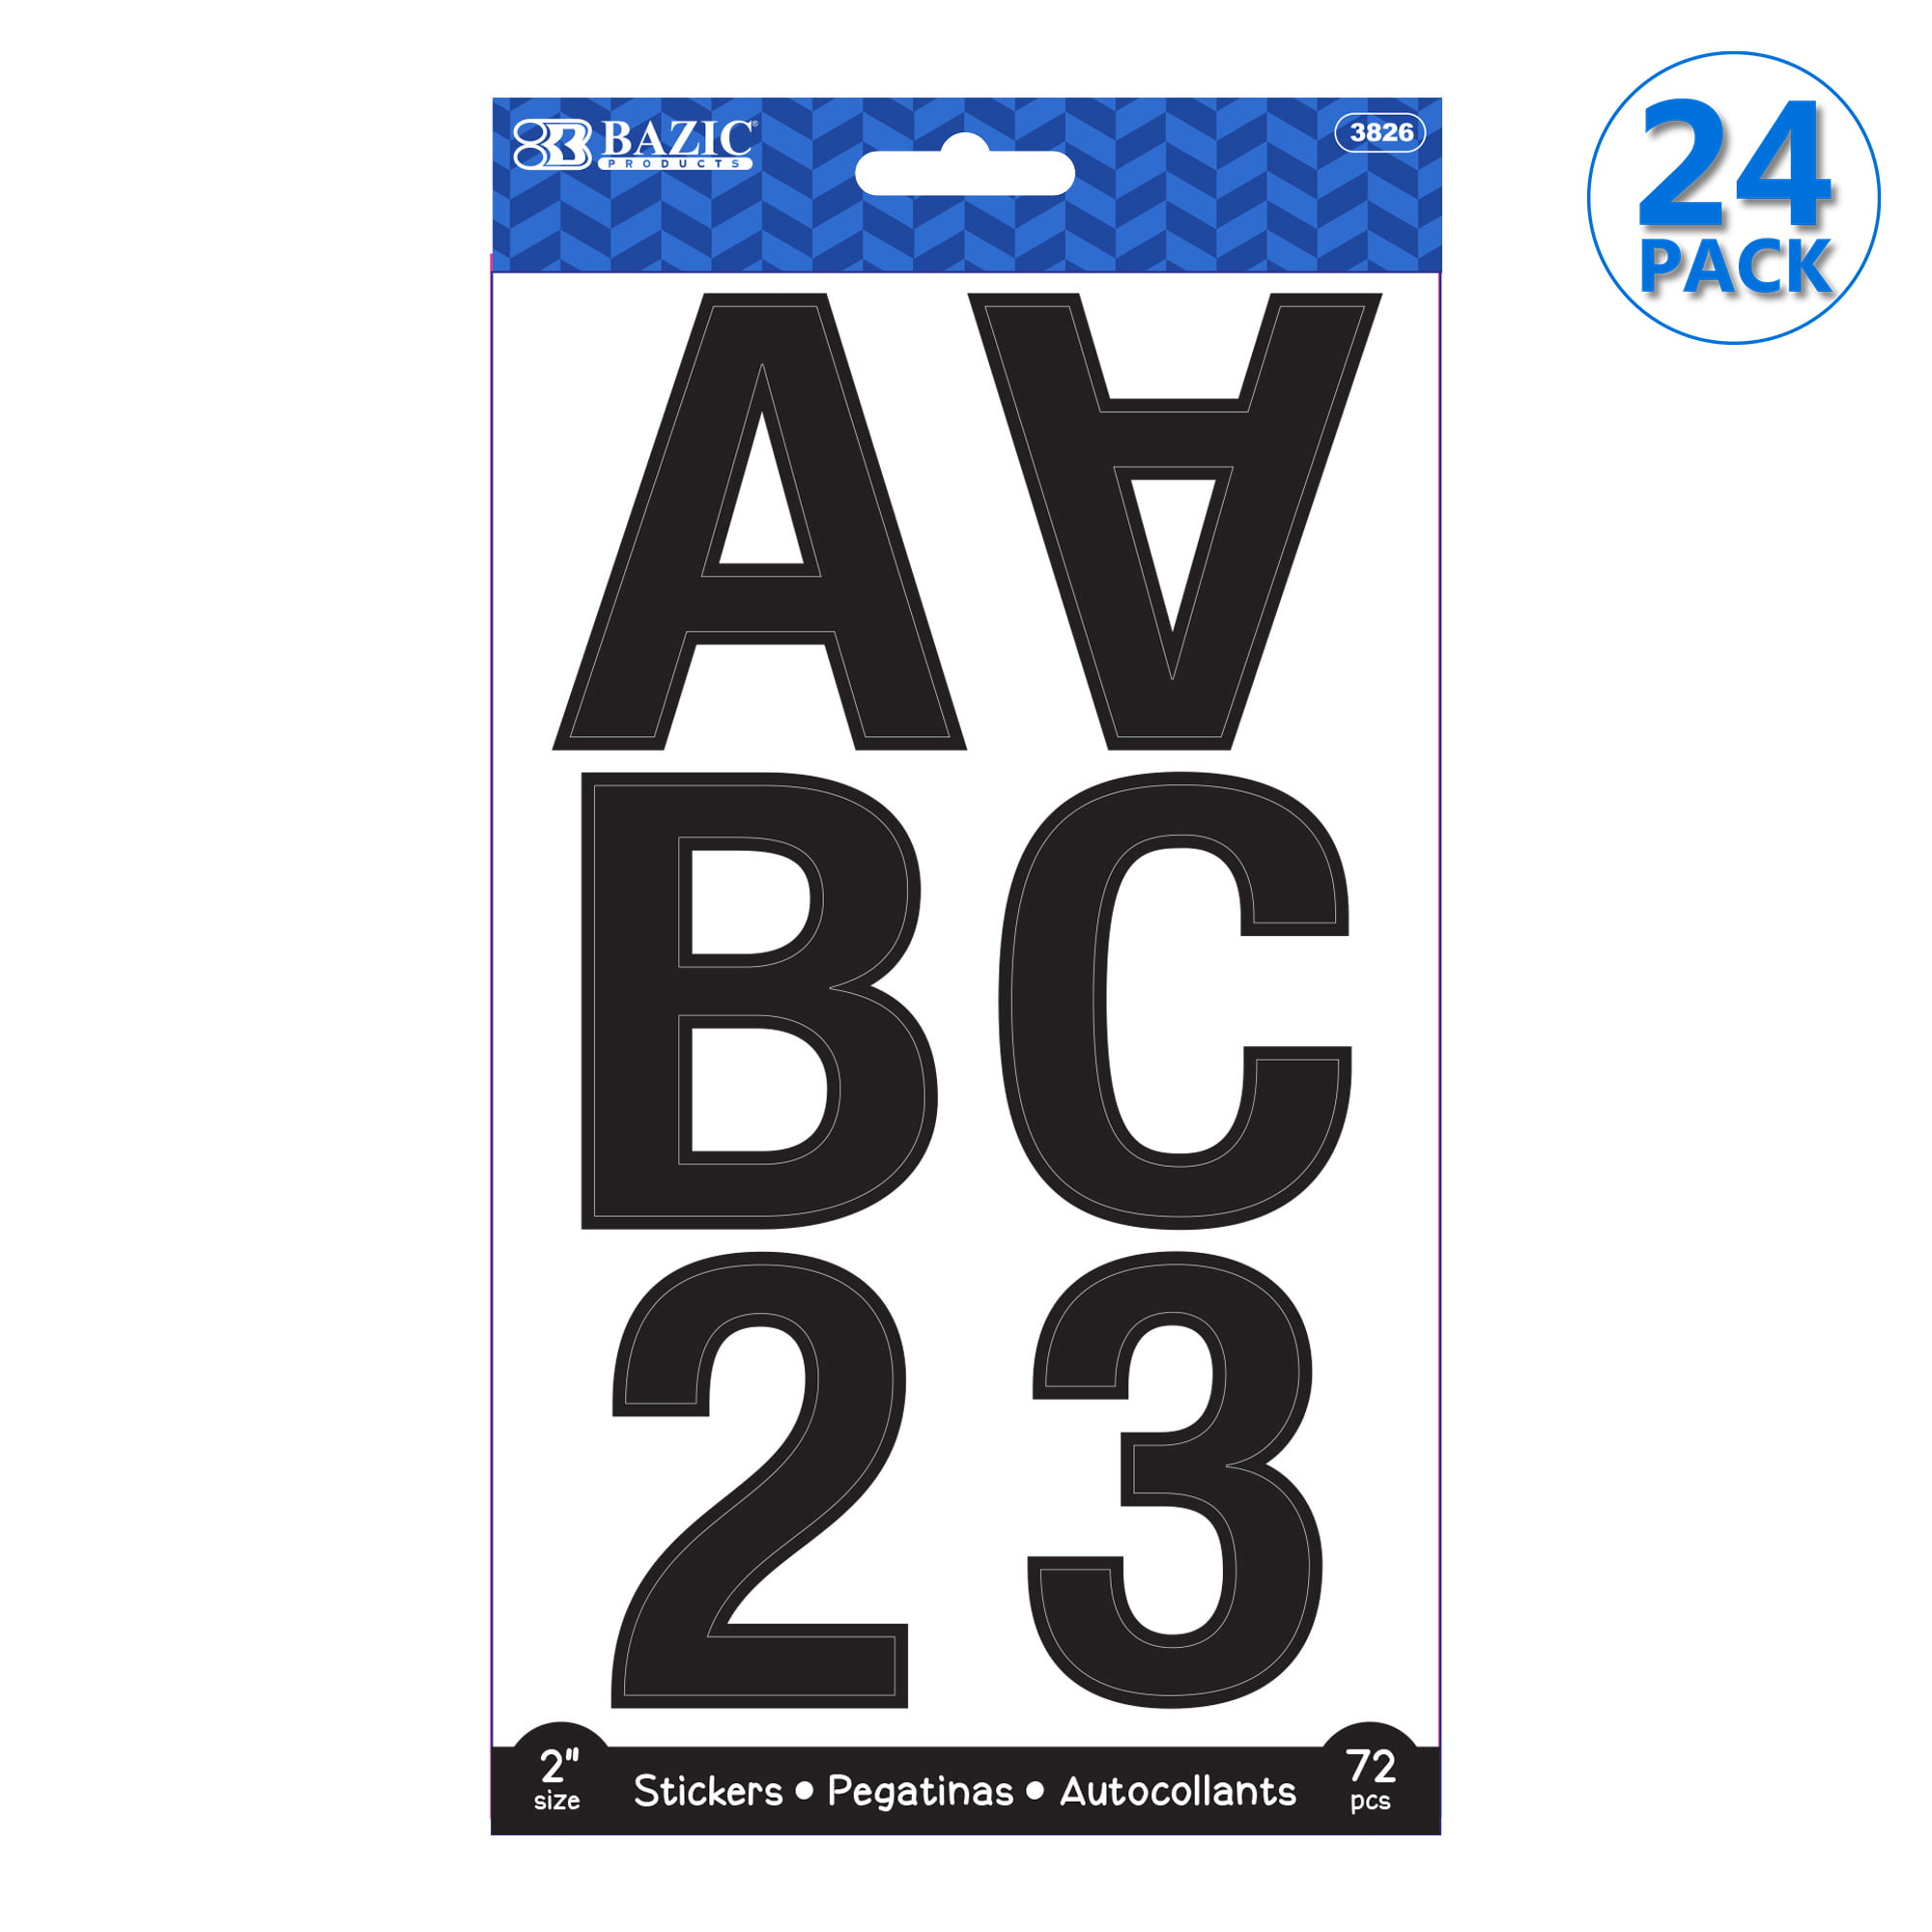 1 2 3 4 5 INCH SELF ADHESIVE VINYL LETTERS AND NUMBERS STICKERS A - Z